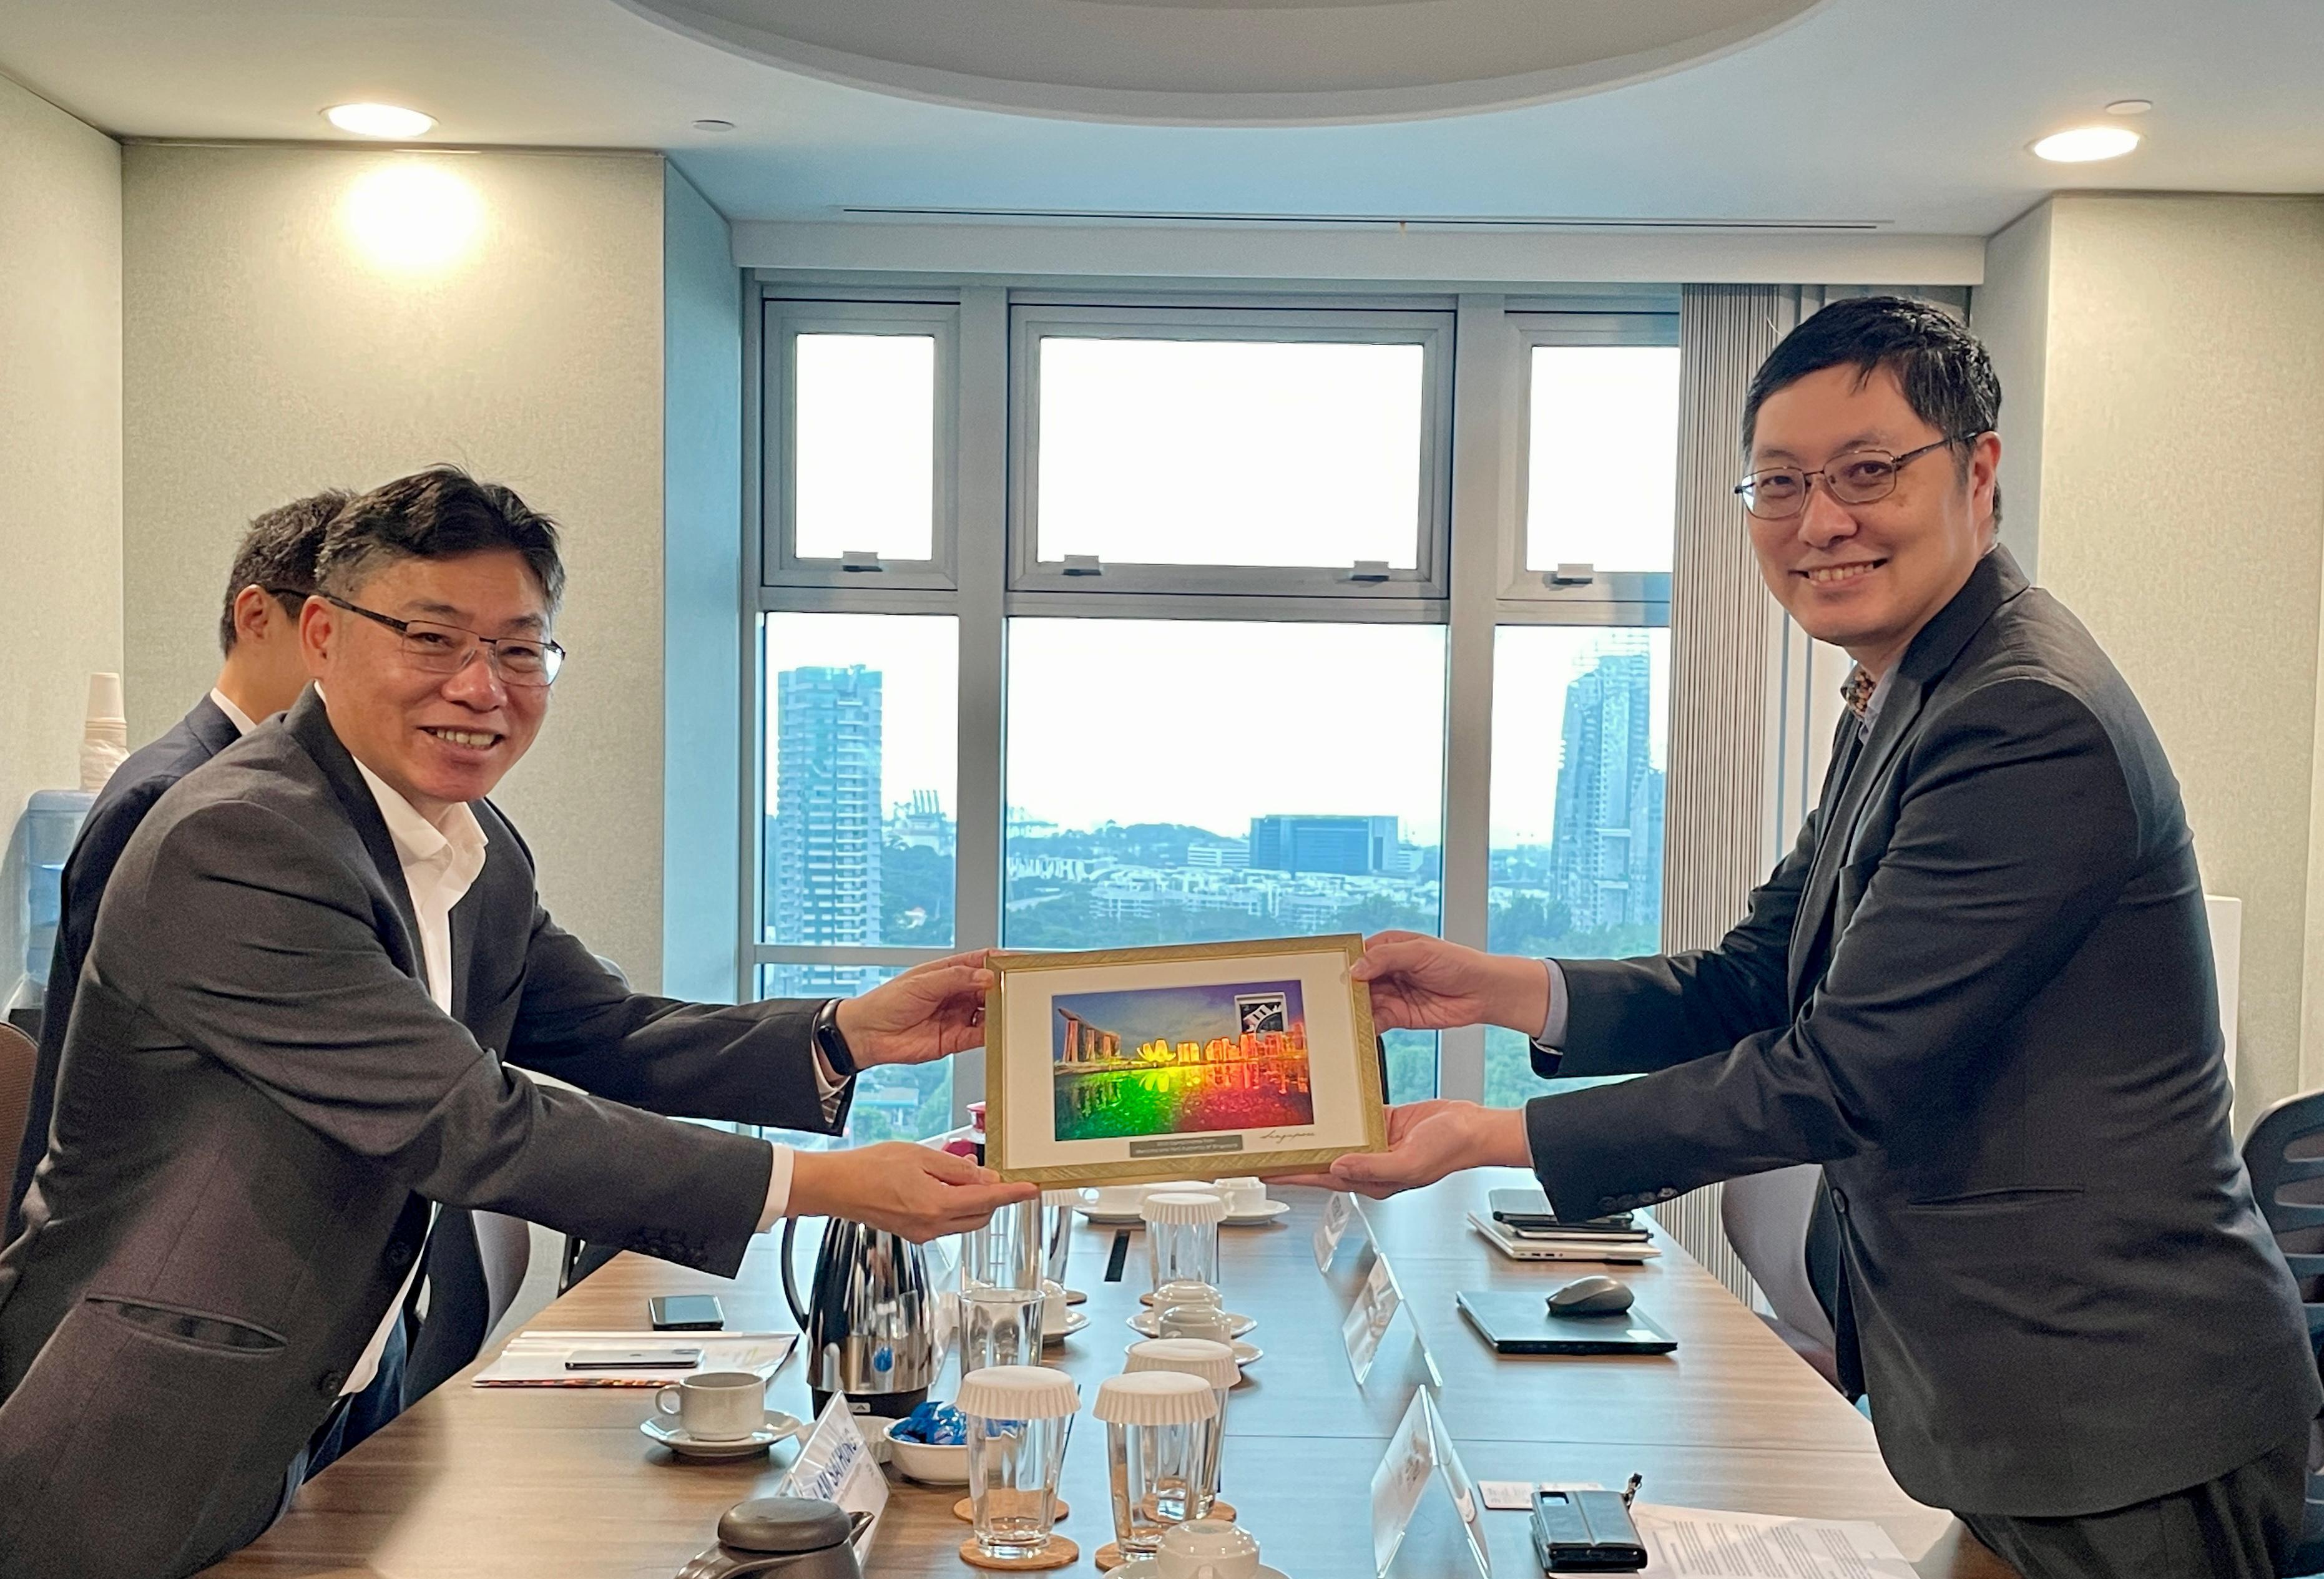 The Secretary for Transport and Logistics, Mr Lam Sai-hung, began his visit programme to Singapore today (January 30) and met with officials from the Maritime and Port Authority of Singapore. Photo shows Mr Lam (left) with the Chief Executive of the Maritime and Port Authority of Singapore, Mr Teo Eng Dih (right).